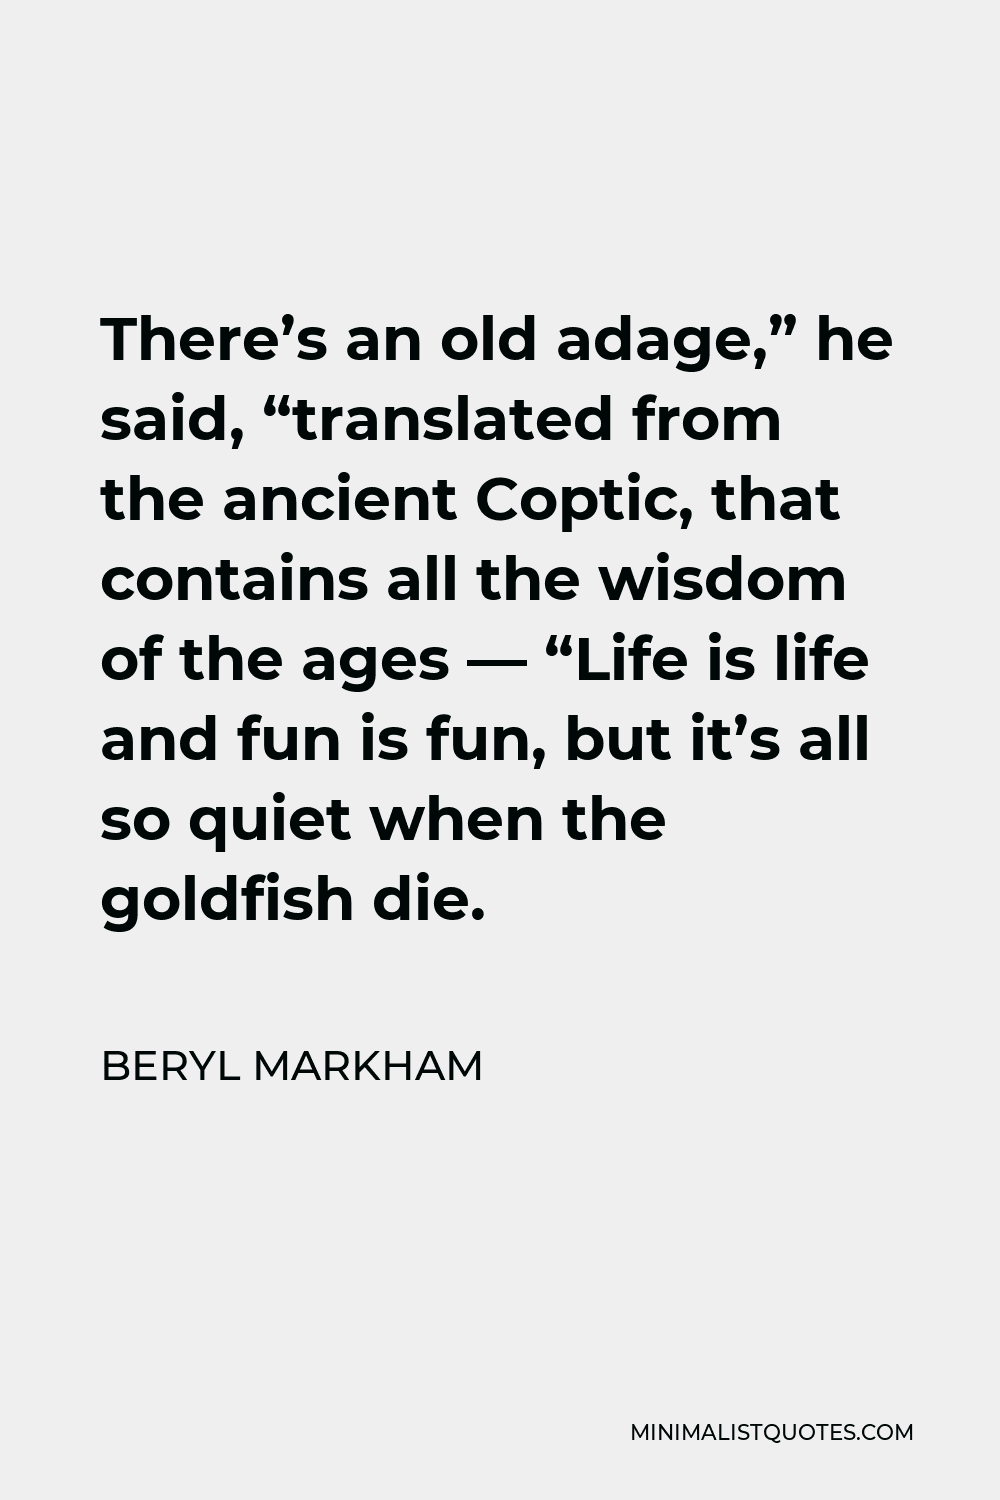 Beryl Markham Quote - There’s an old adage,” he said, “translated from the ancient Coptic, that contains all the wisdom of the ages — “Life is life and fun is fun, but it’s all so quiet when the goldfish die.